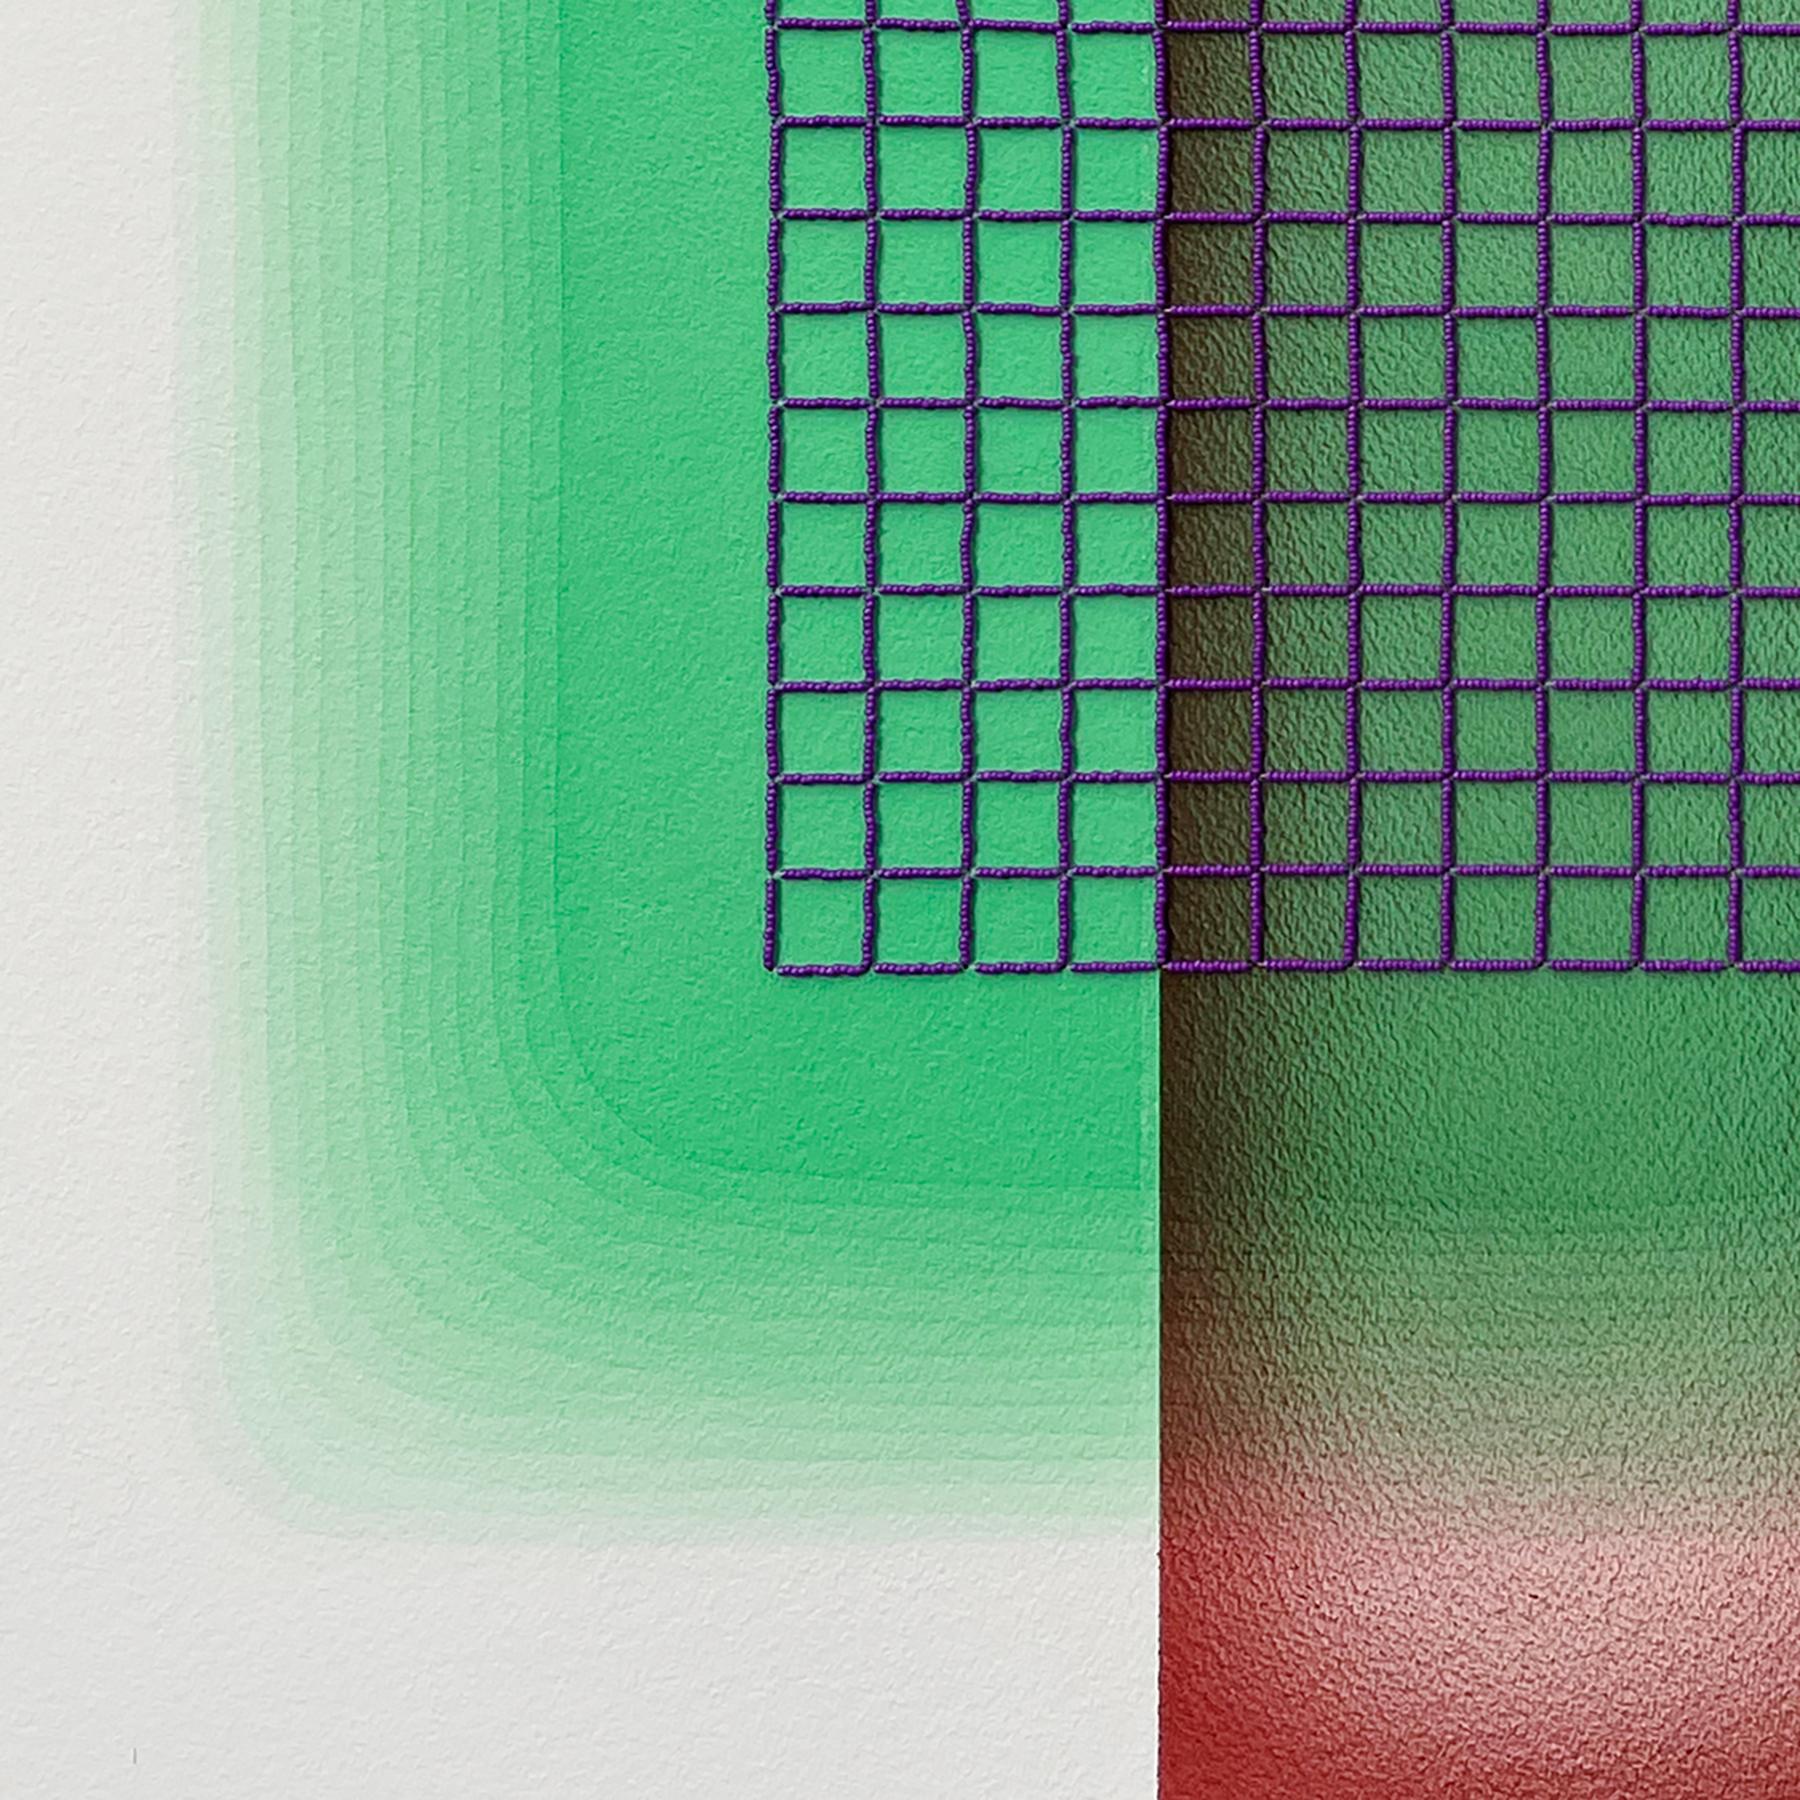 'Color Interaction IV (9)' - color theory, glass beads, bright, saturated, grid - Contemporary Art by Gretchen Wagner